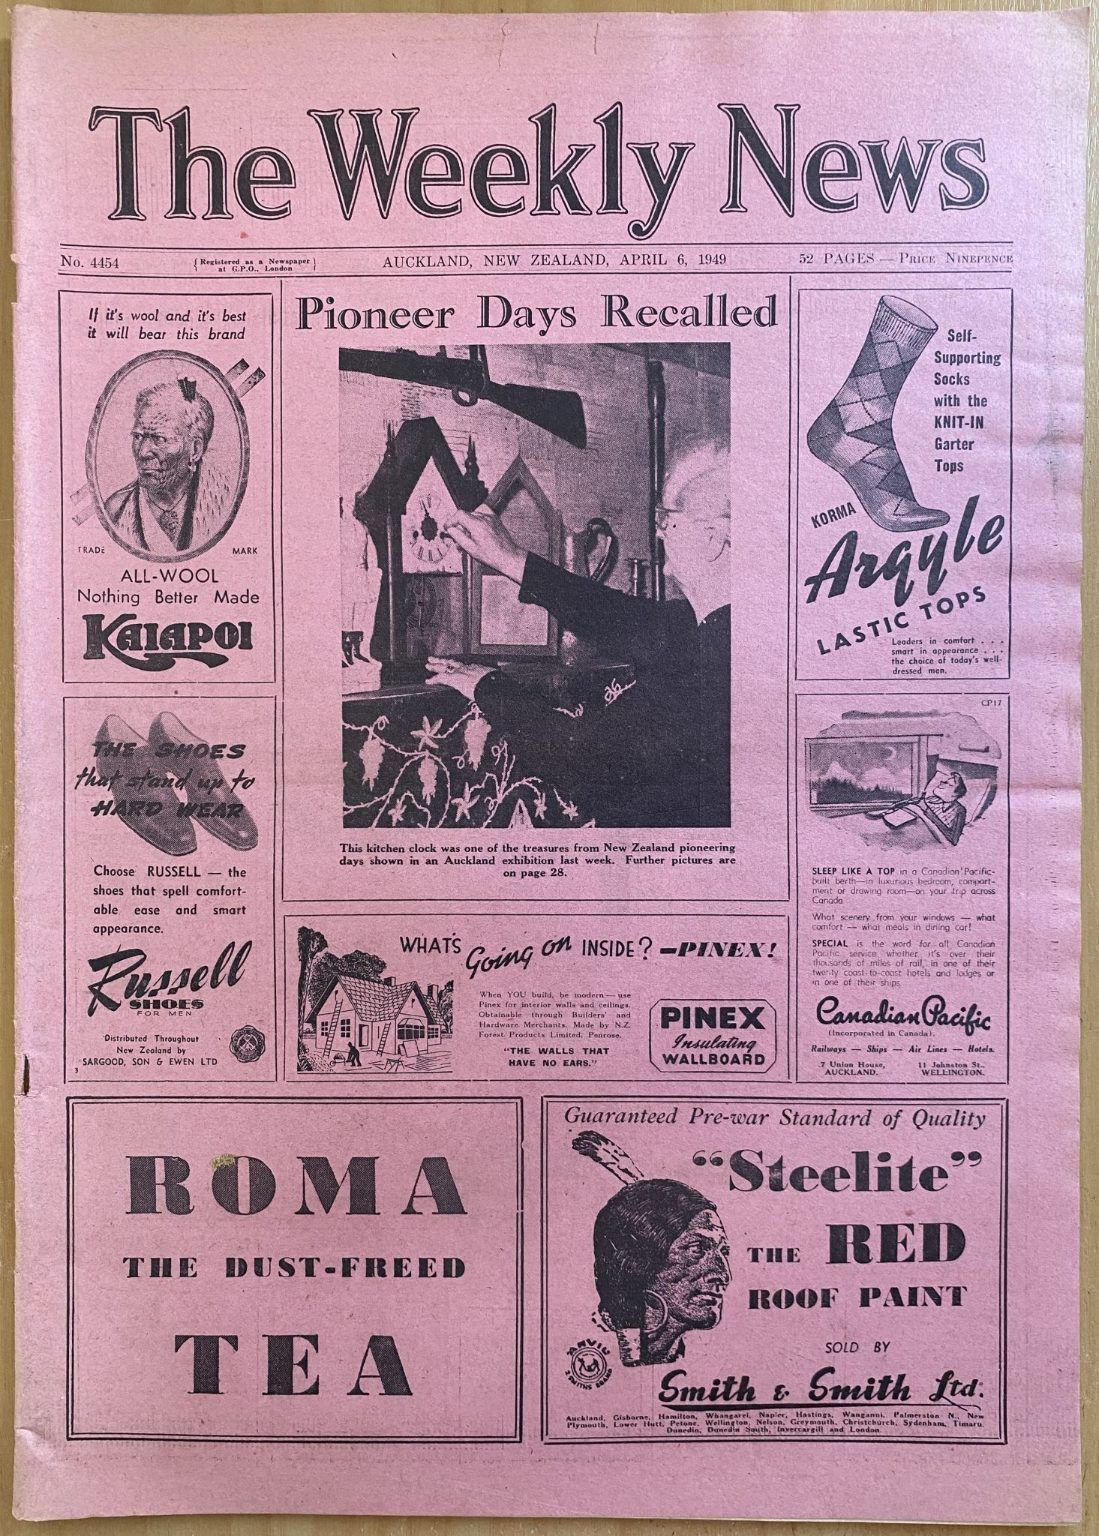 OLD NEWSPAPER: The Weekly News, No. 4454, 6 April 1949